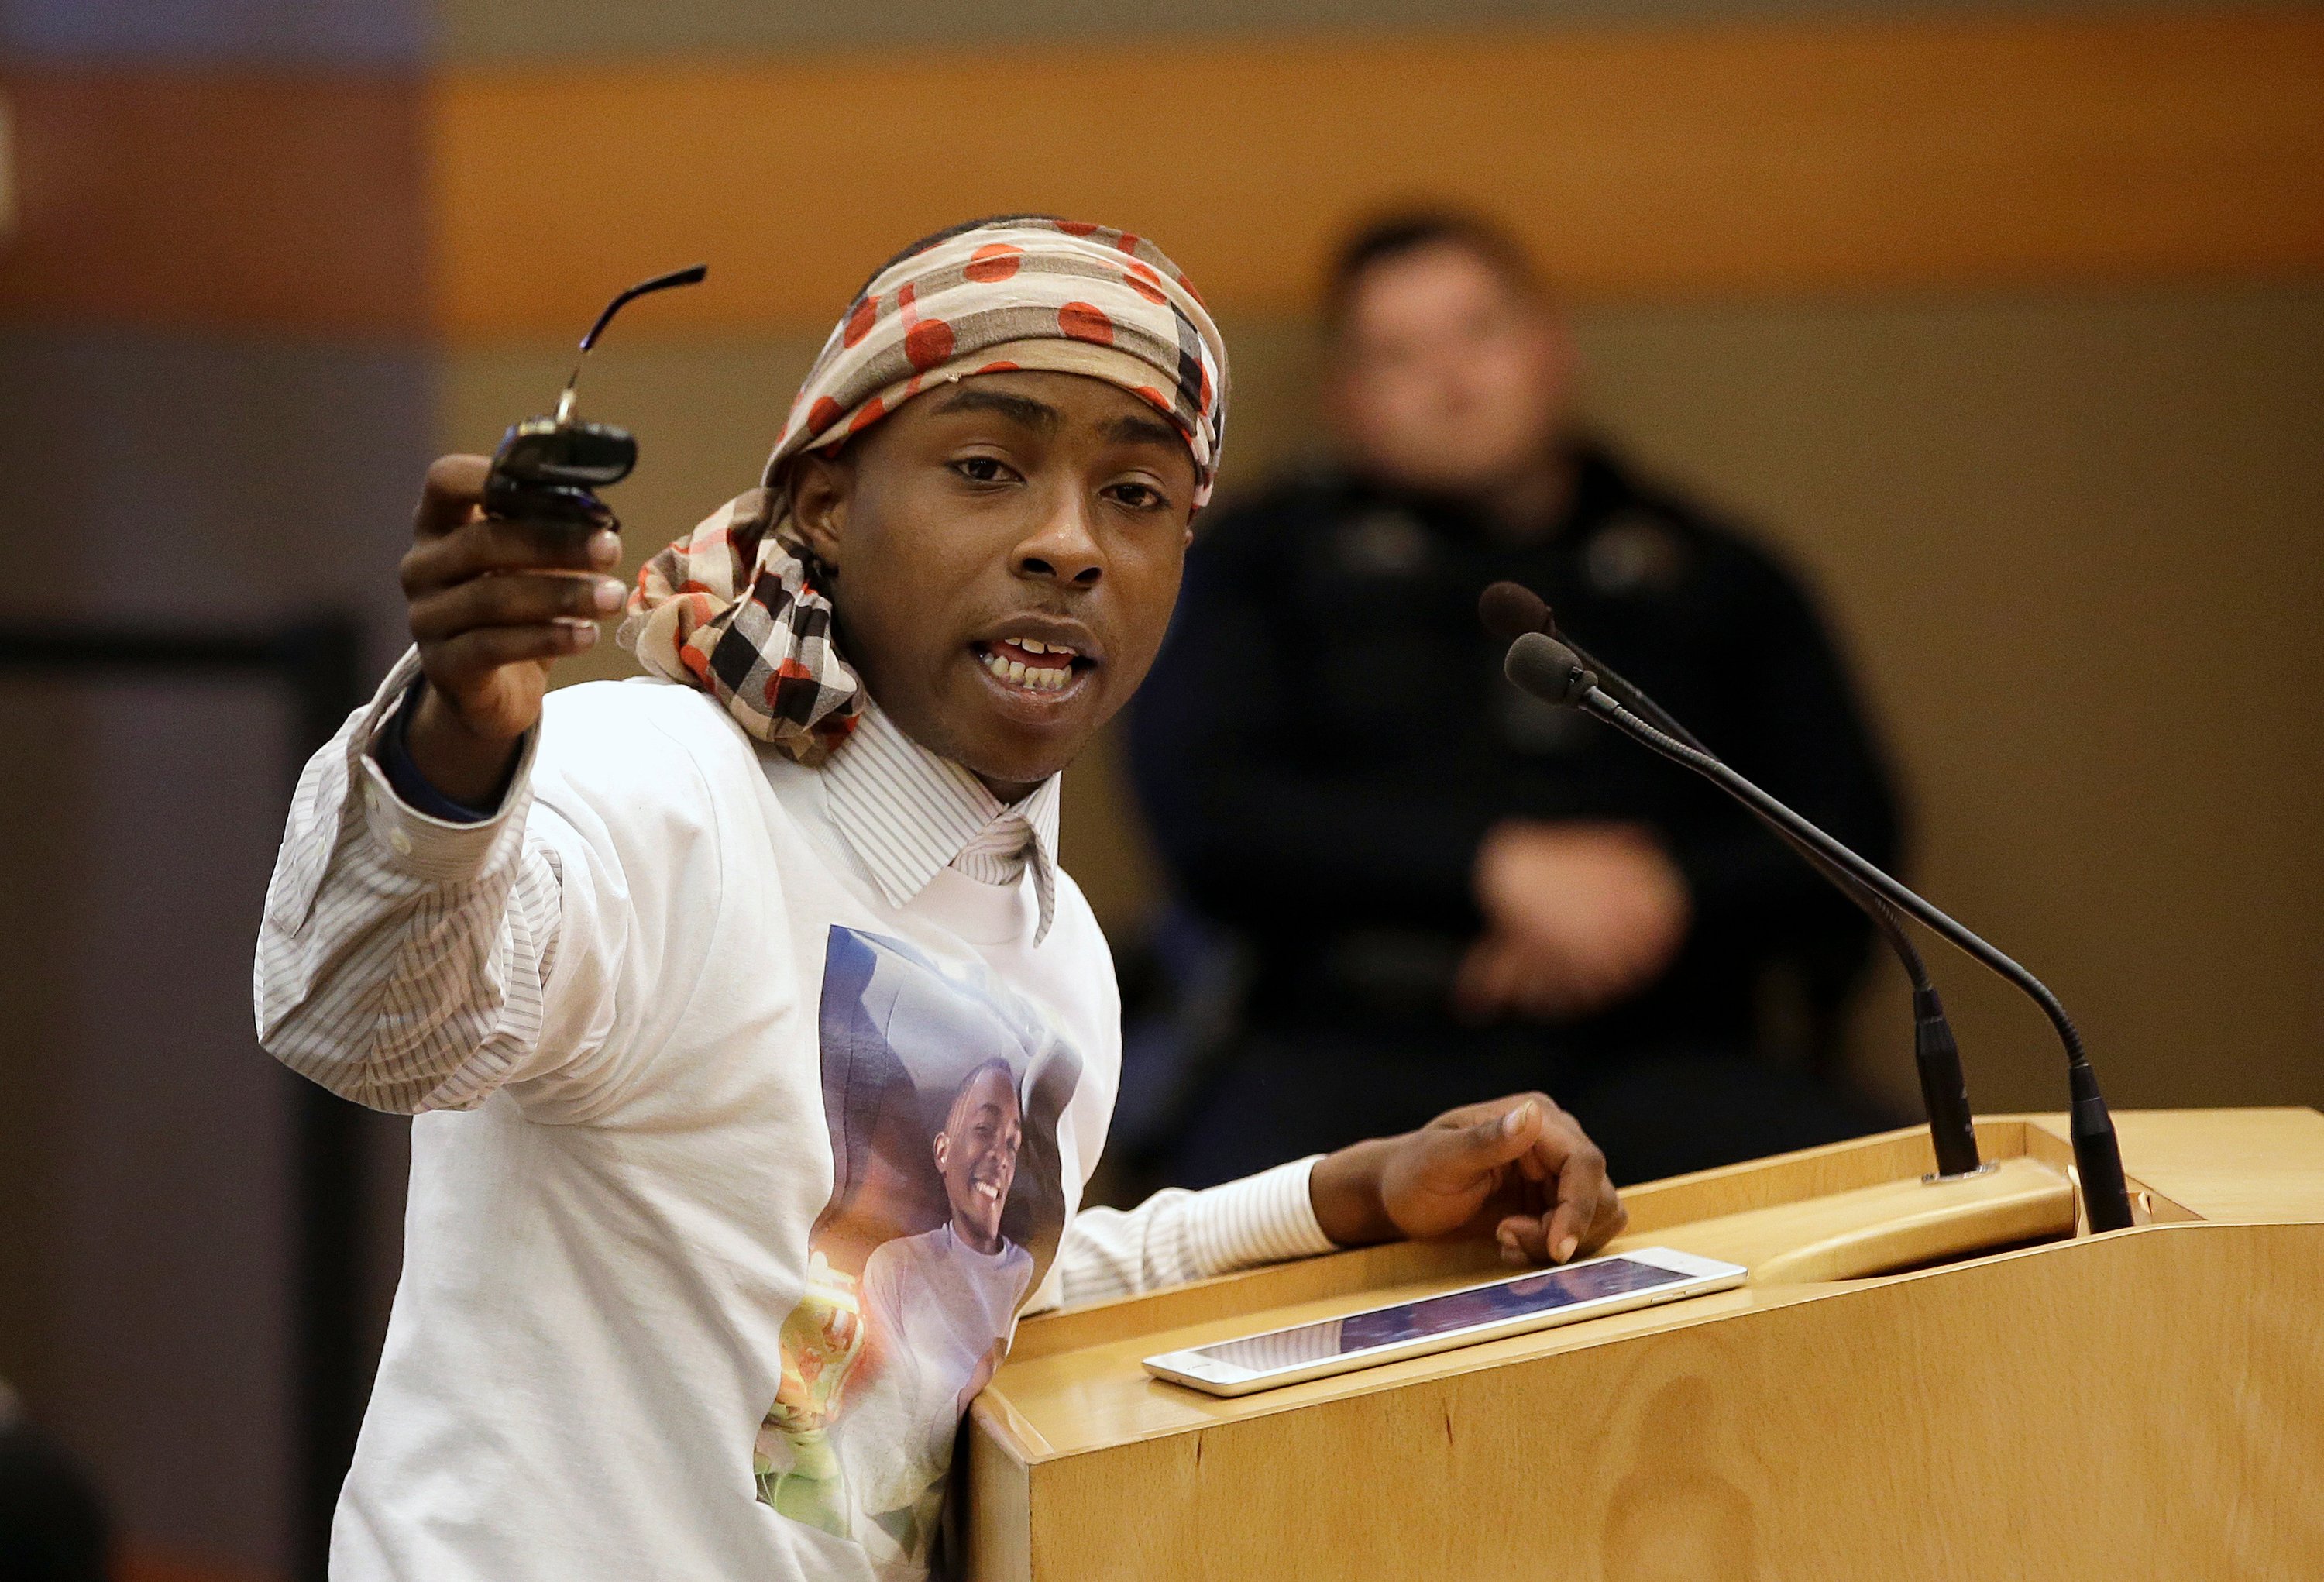 (AP) - California prosecutors on Monday charged the brother of an unarmed b...